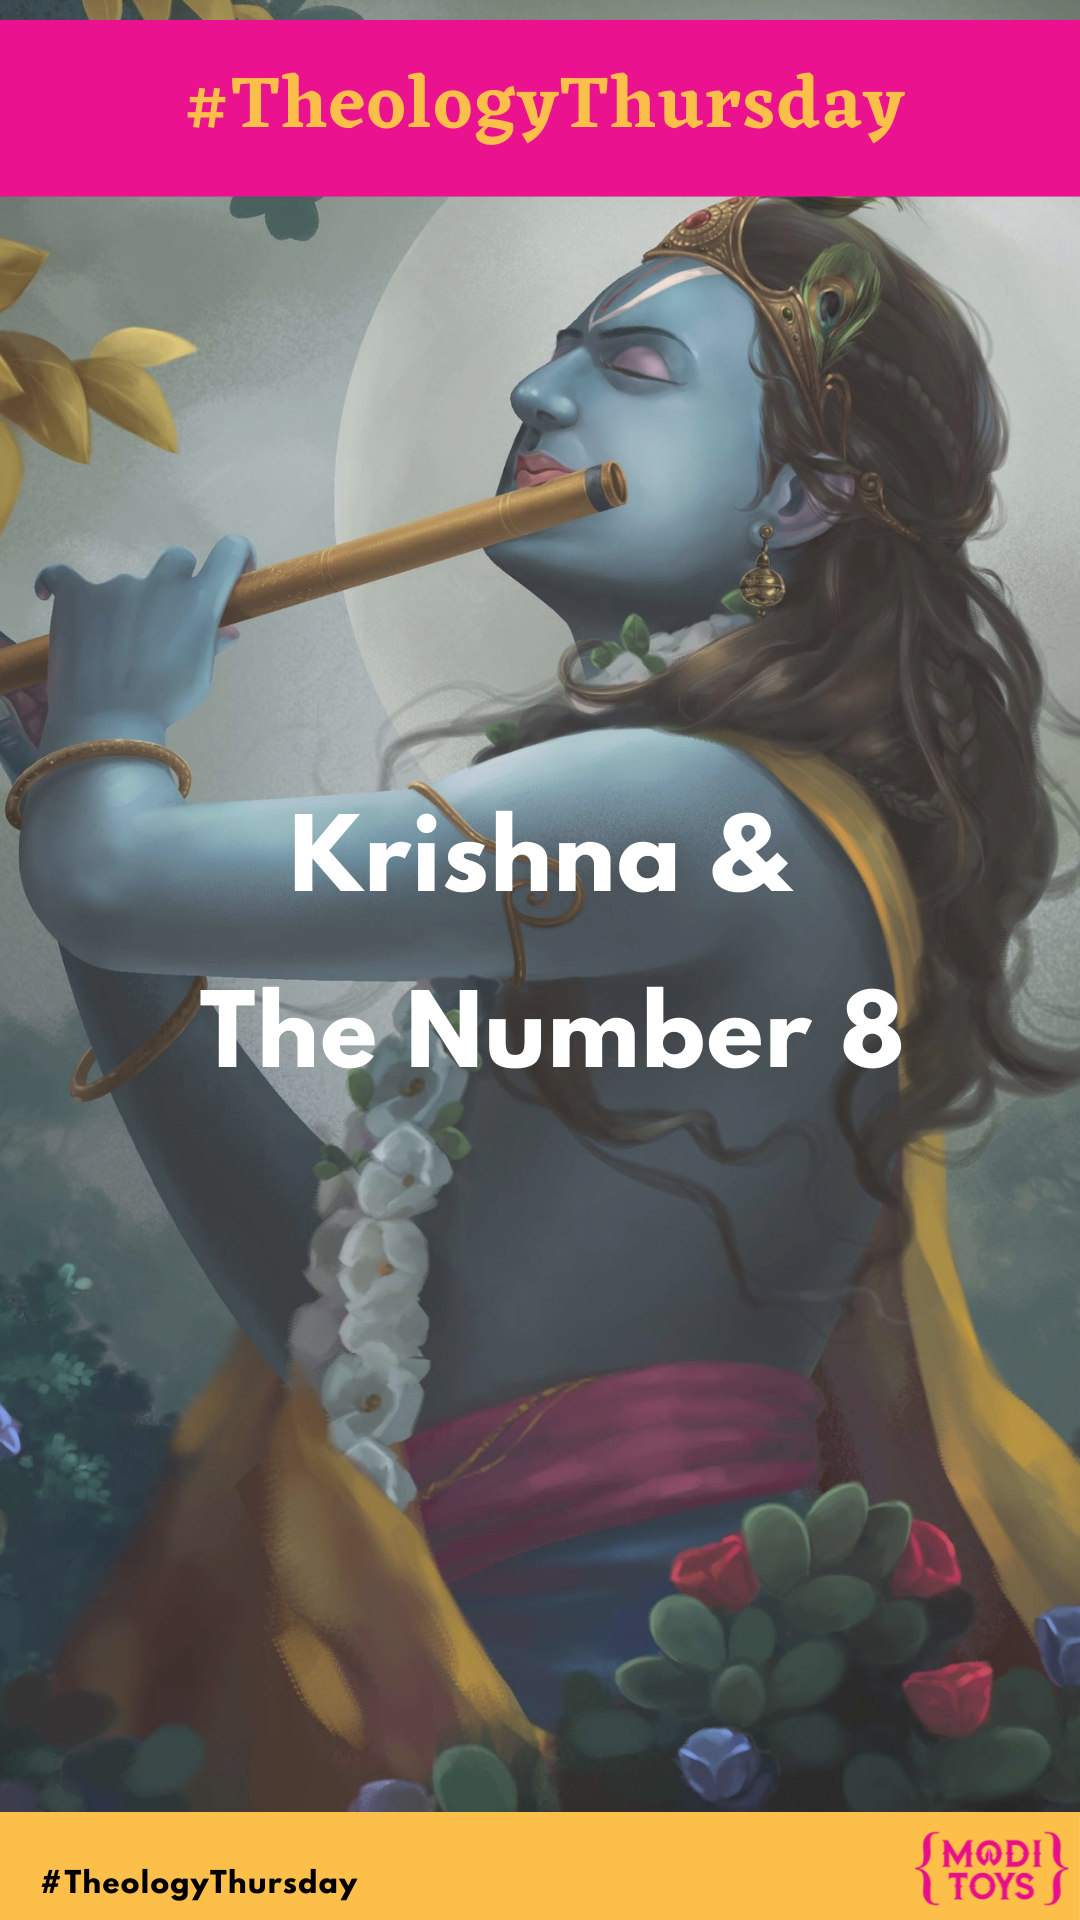 Why is Krishna connected to the Number 8?